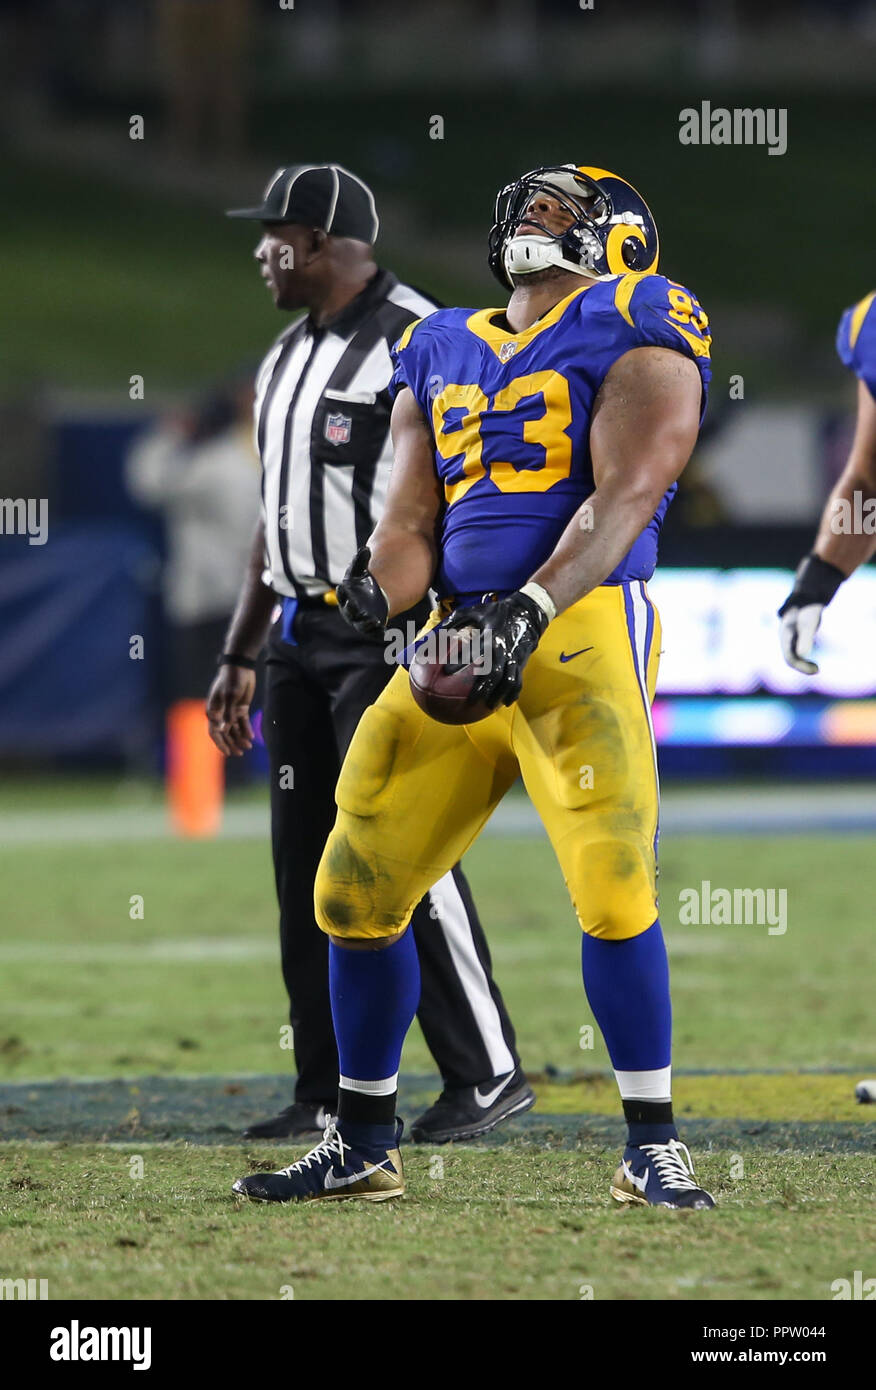 Los Angeles, CA, USA. 27th Sep, 2018. during the NFL Minnesota Vikings vs Los Angeles Rams at the Los Angeles Memorial Coliseum in Los Angeles, Ca on September 27, 2018. Jevone Moore Credit: csm/Alamy Live News Stock Photo